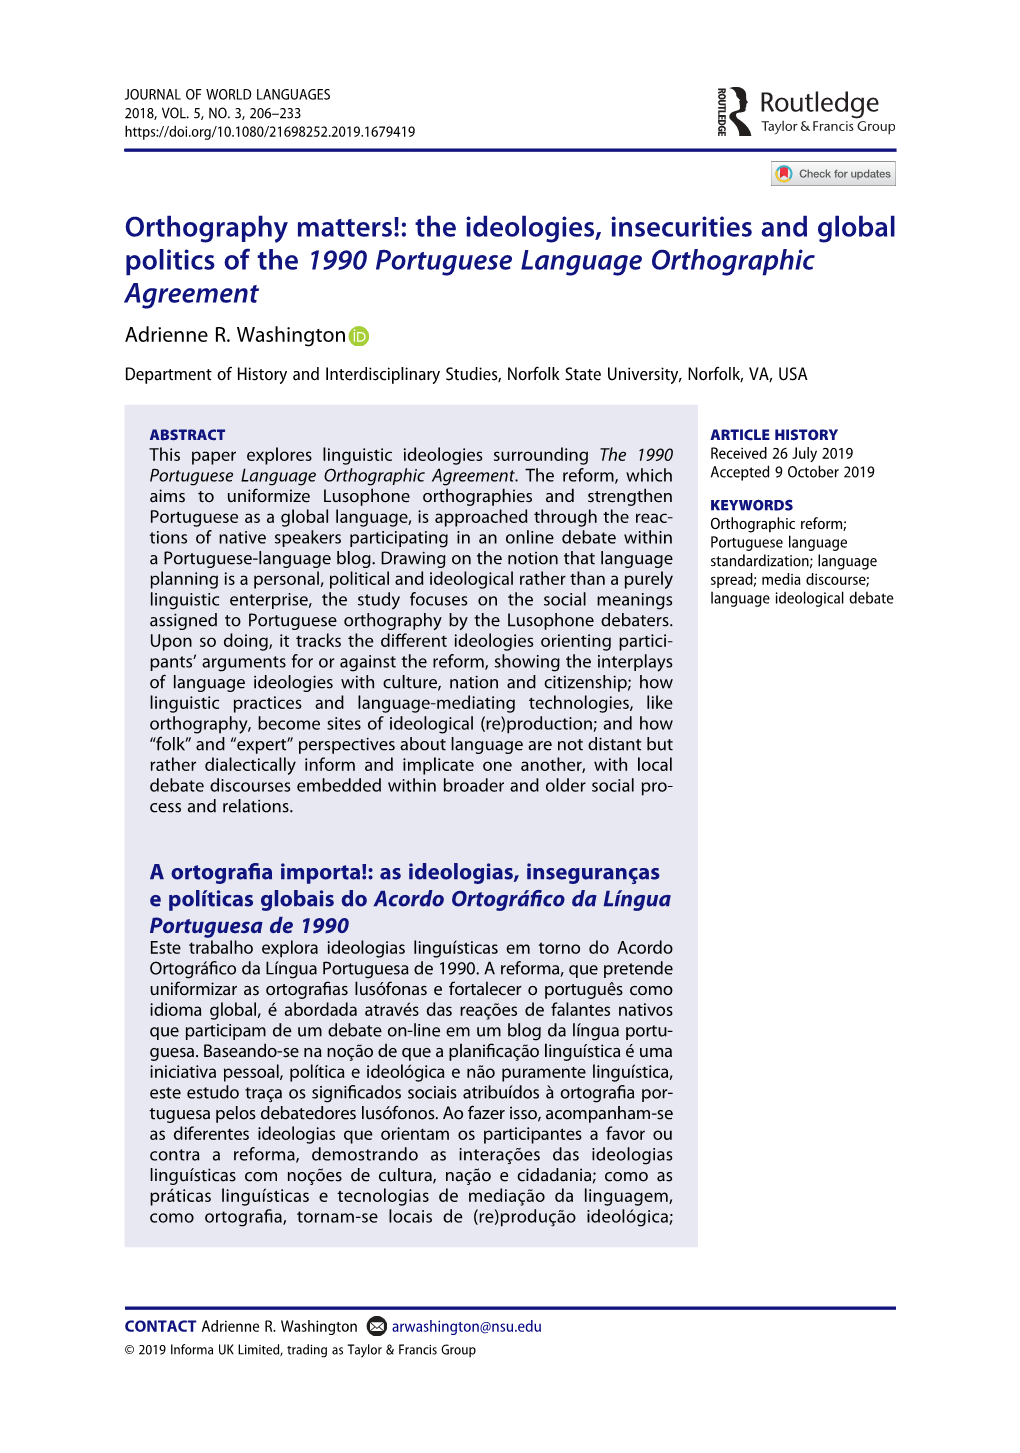 Orthography Matters!: the Ideologies, Insecurities and Global Politics of the 1990 Portuguese Language Orthographic Agreement Adrienne R